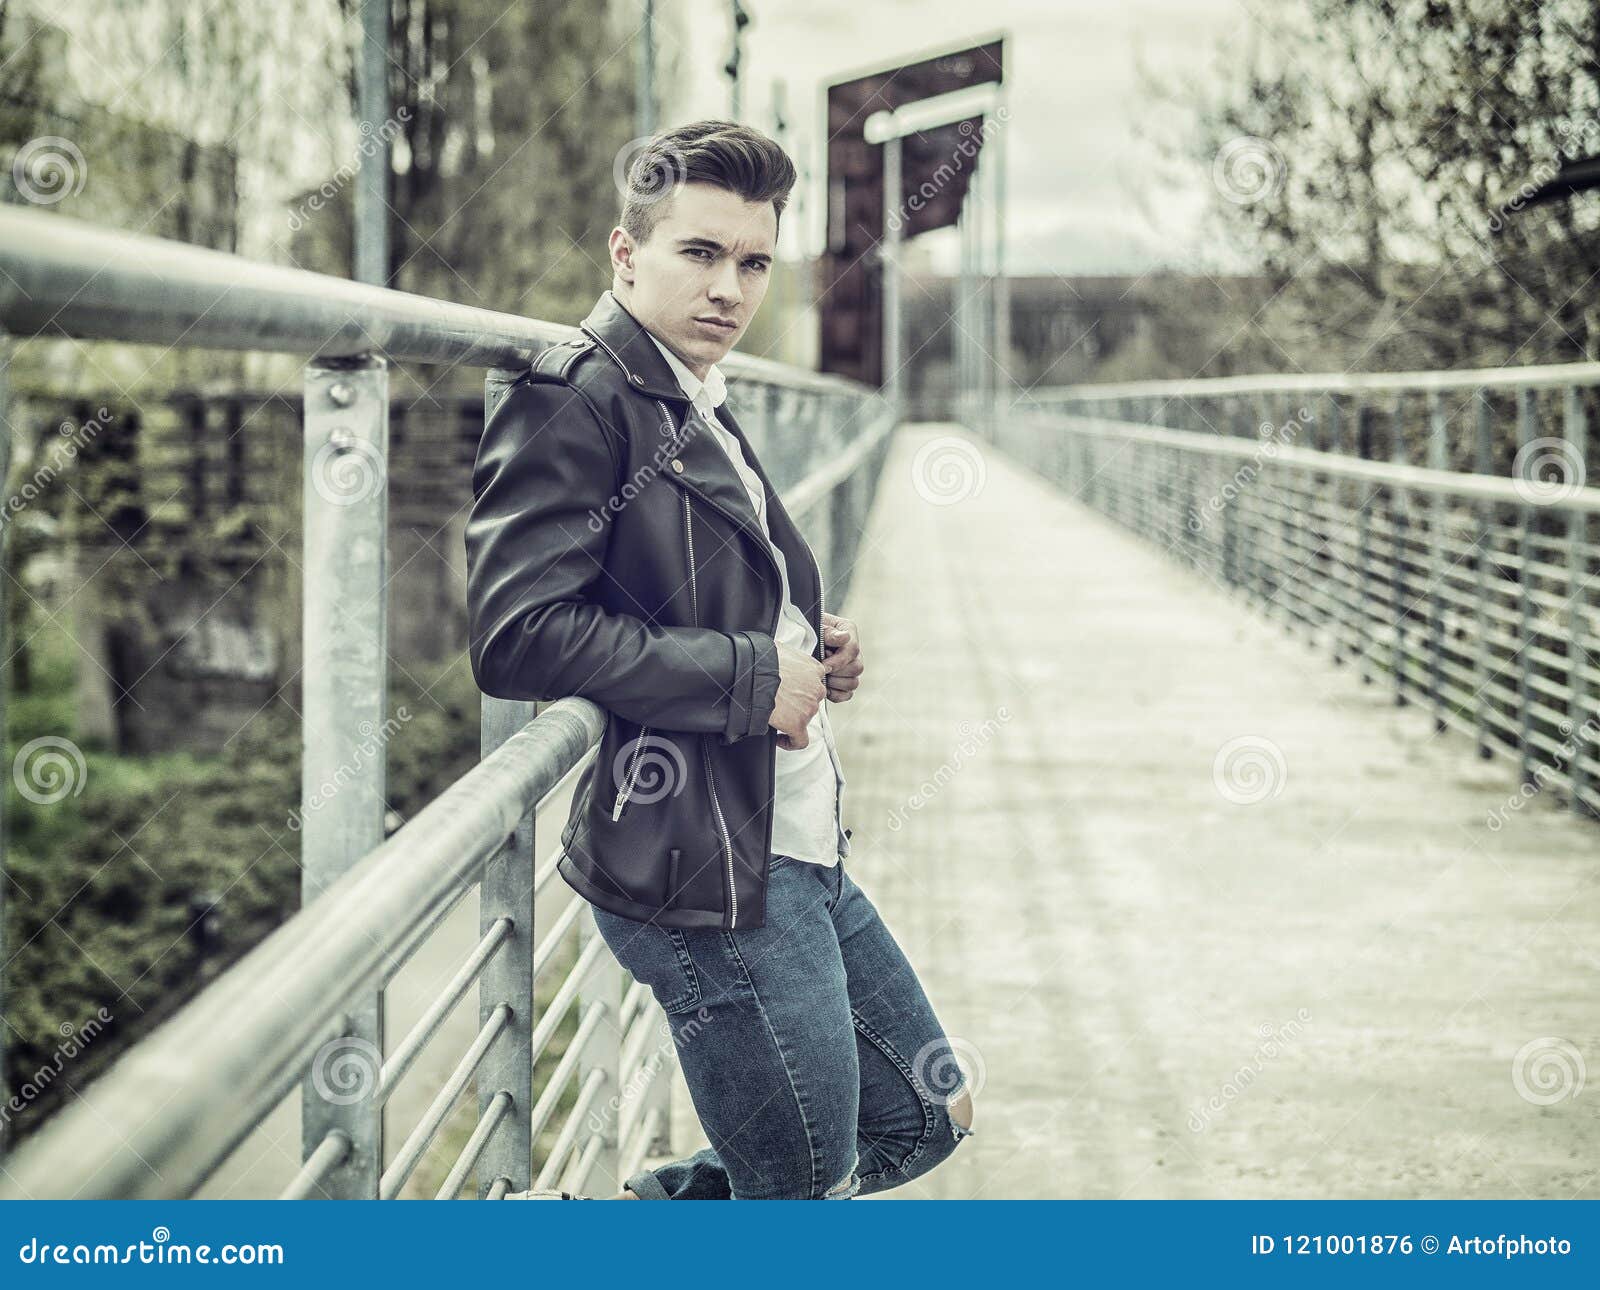 One Handsome Young Man in Urban Setting Stock Photo - Image of ...